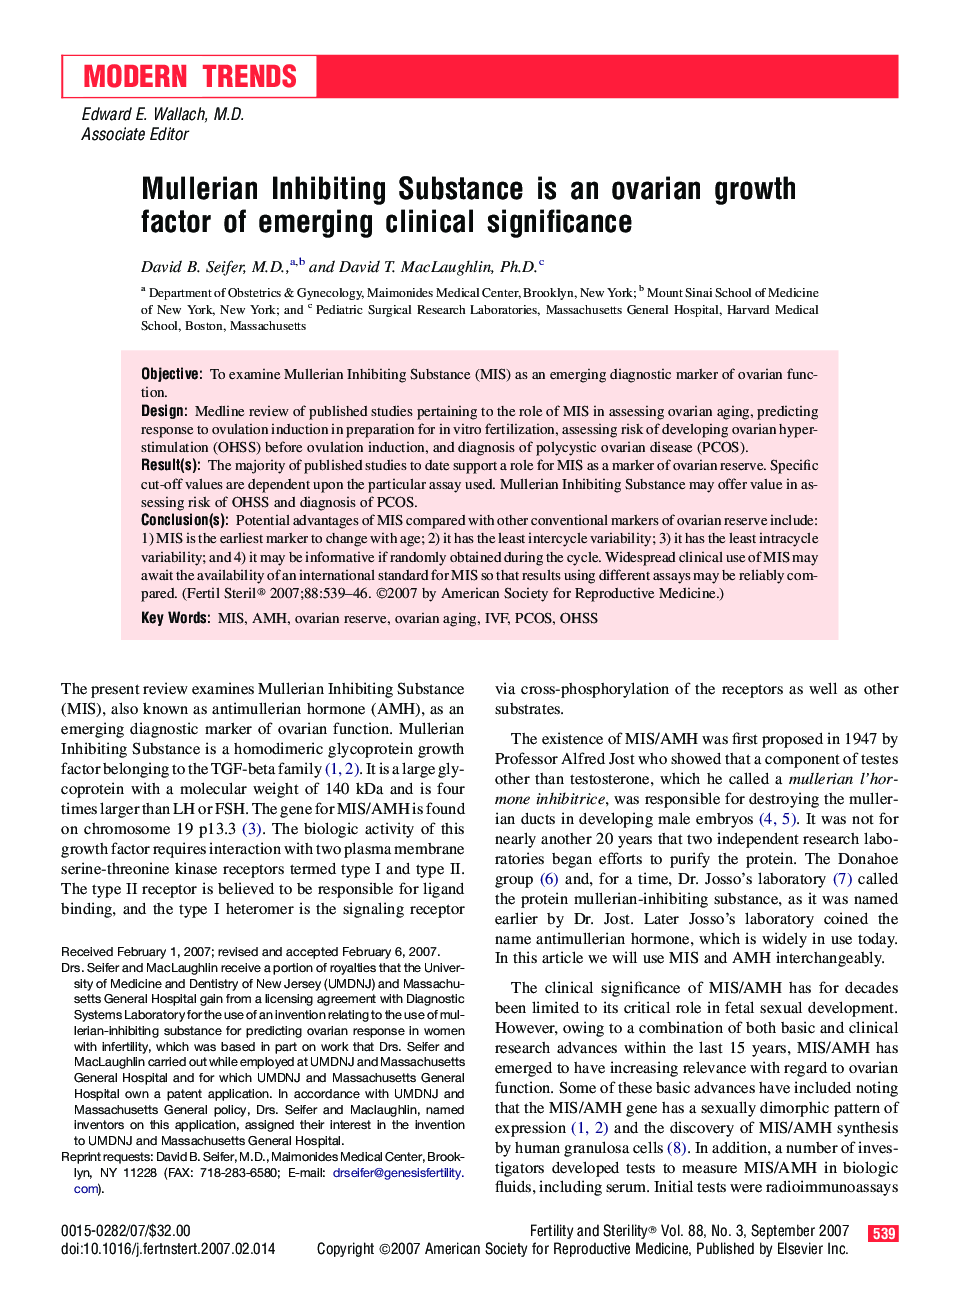 Mullerian Inhibiting Substance is an ovarian growth factor of emerging clinical significance 